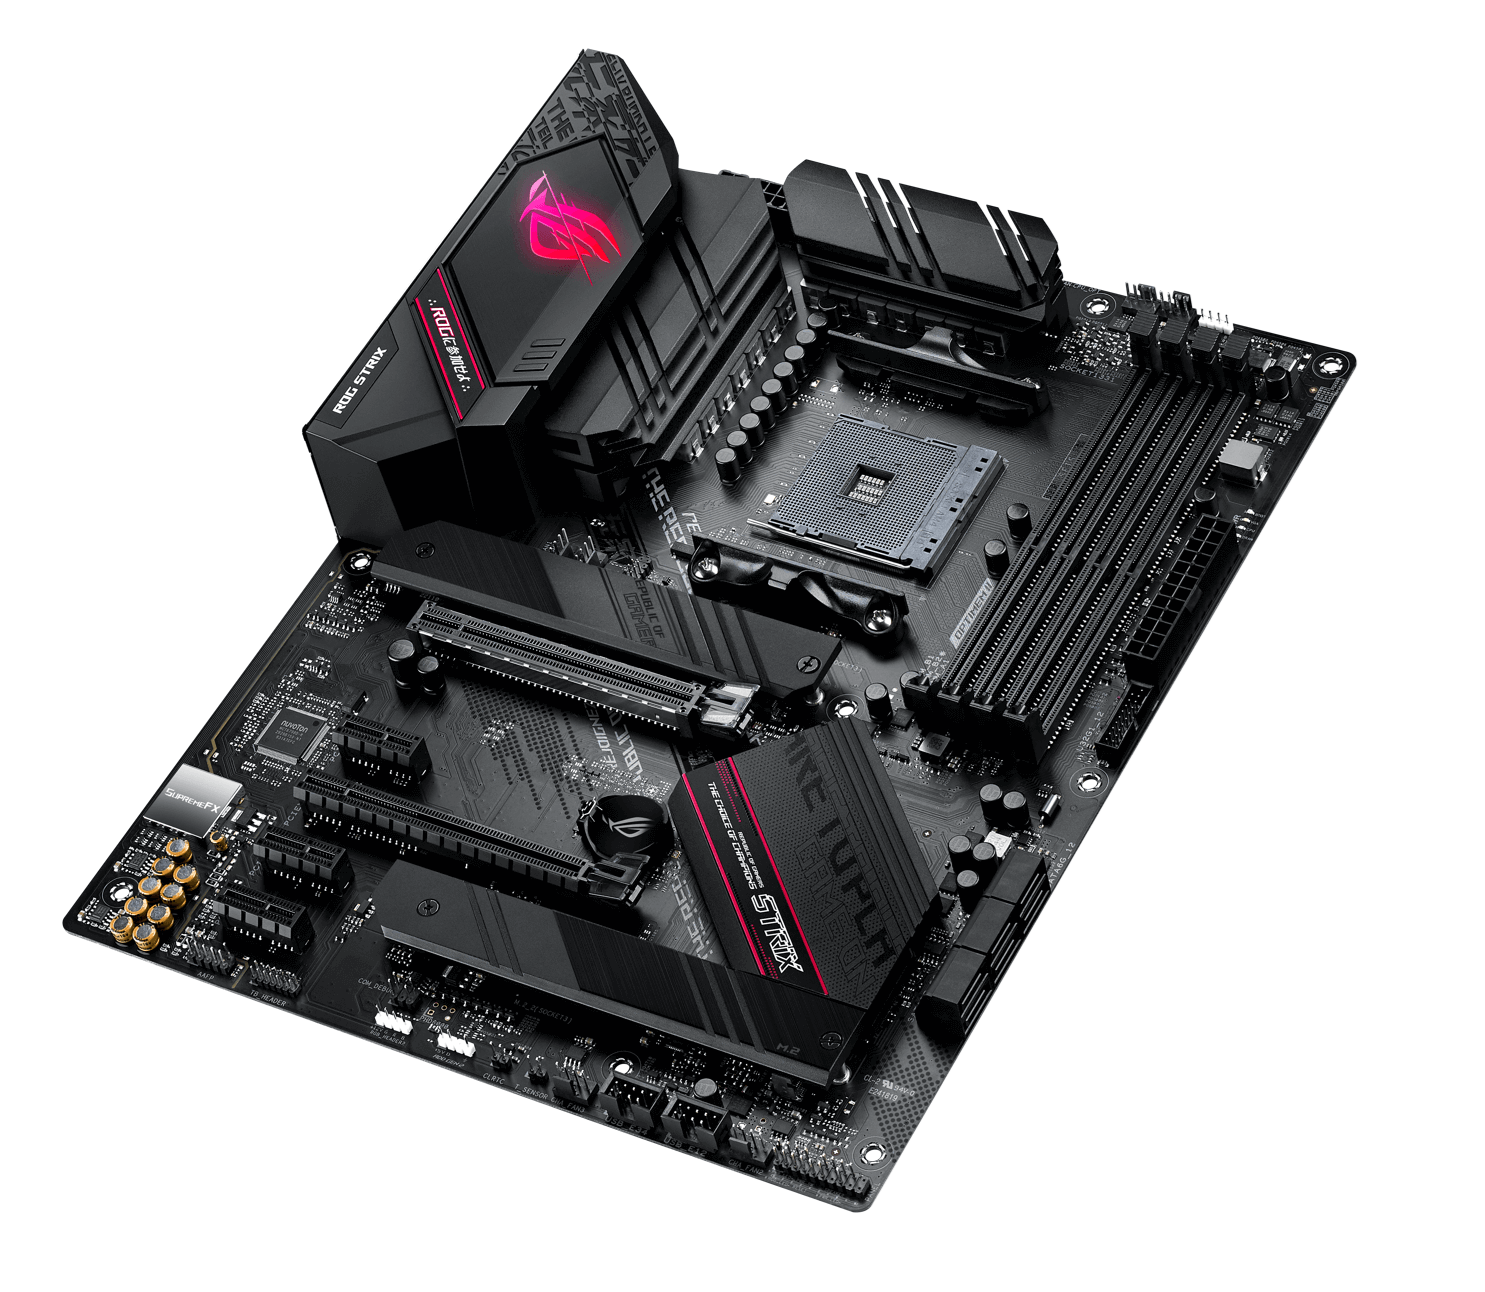 The ROG Strix B550-E Gaming showing the processors and expansion card setups 